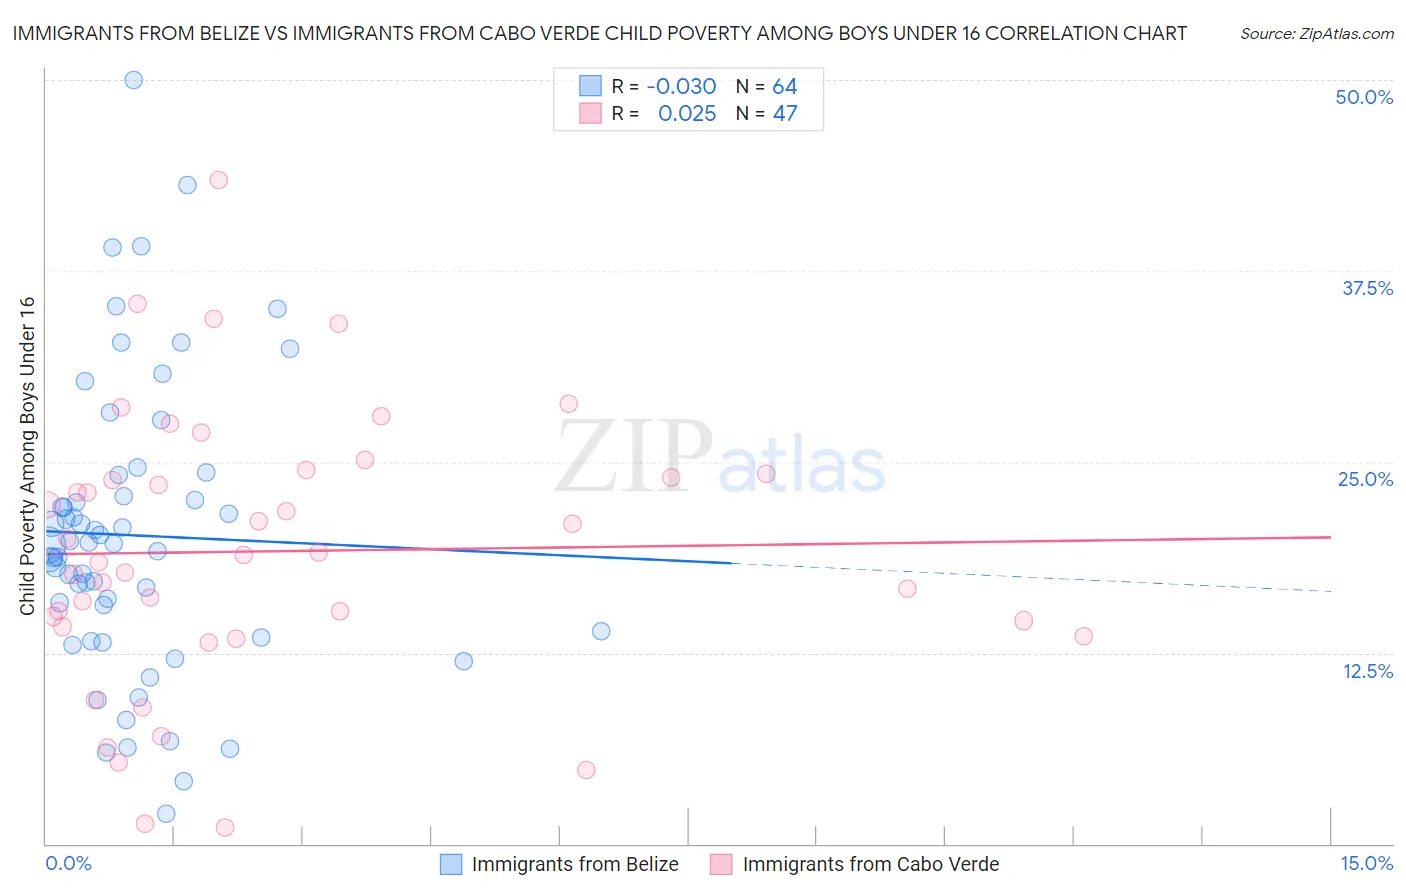 Immigrants from Belize vs Immigrants from Cabo Verde Child Poverty Among Boys Under 16